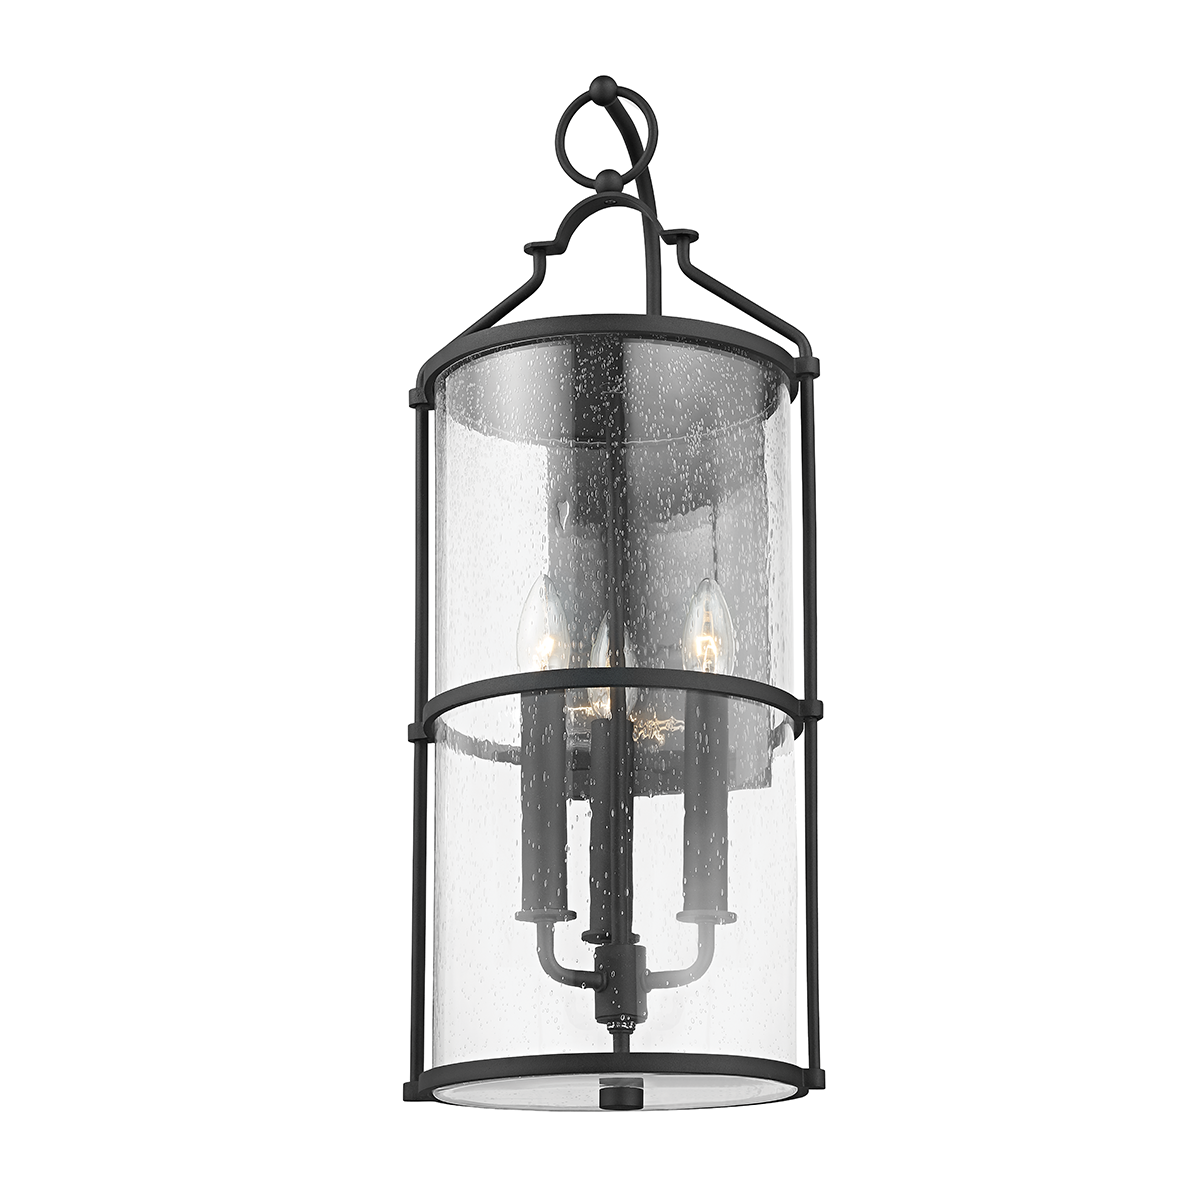 Troy Lighting 3 LIGHT LARGE EXTERIOR WALL SCONCE B1313 Outdoor l Wall Troy Lighting TEXTURE BLACK  